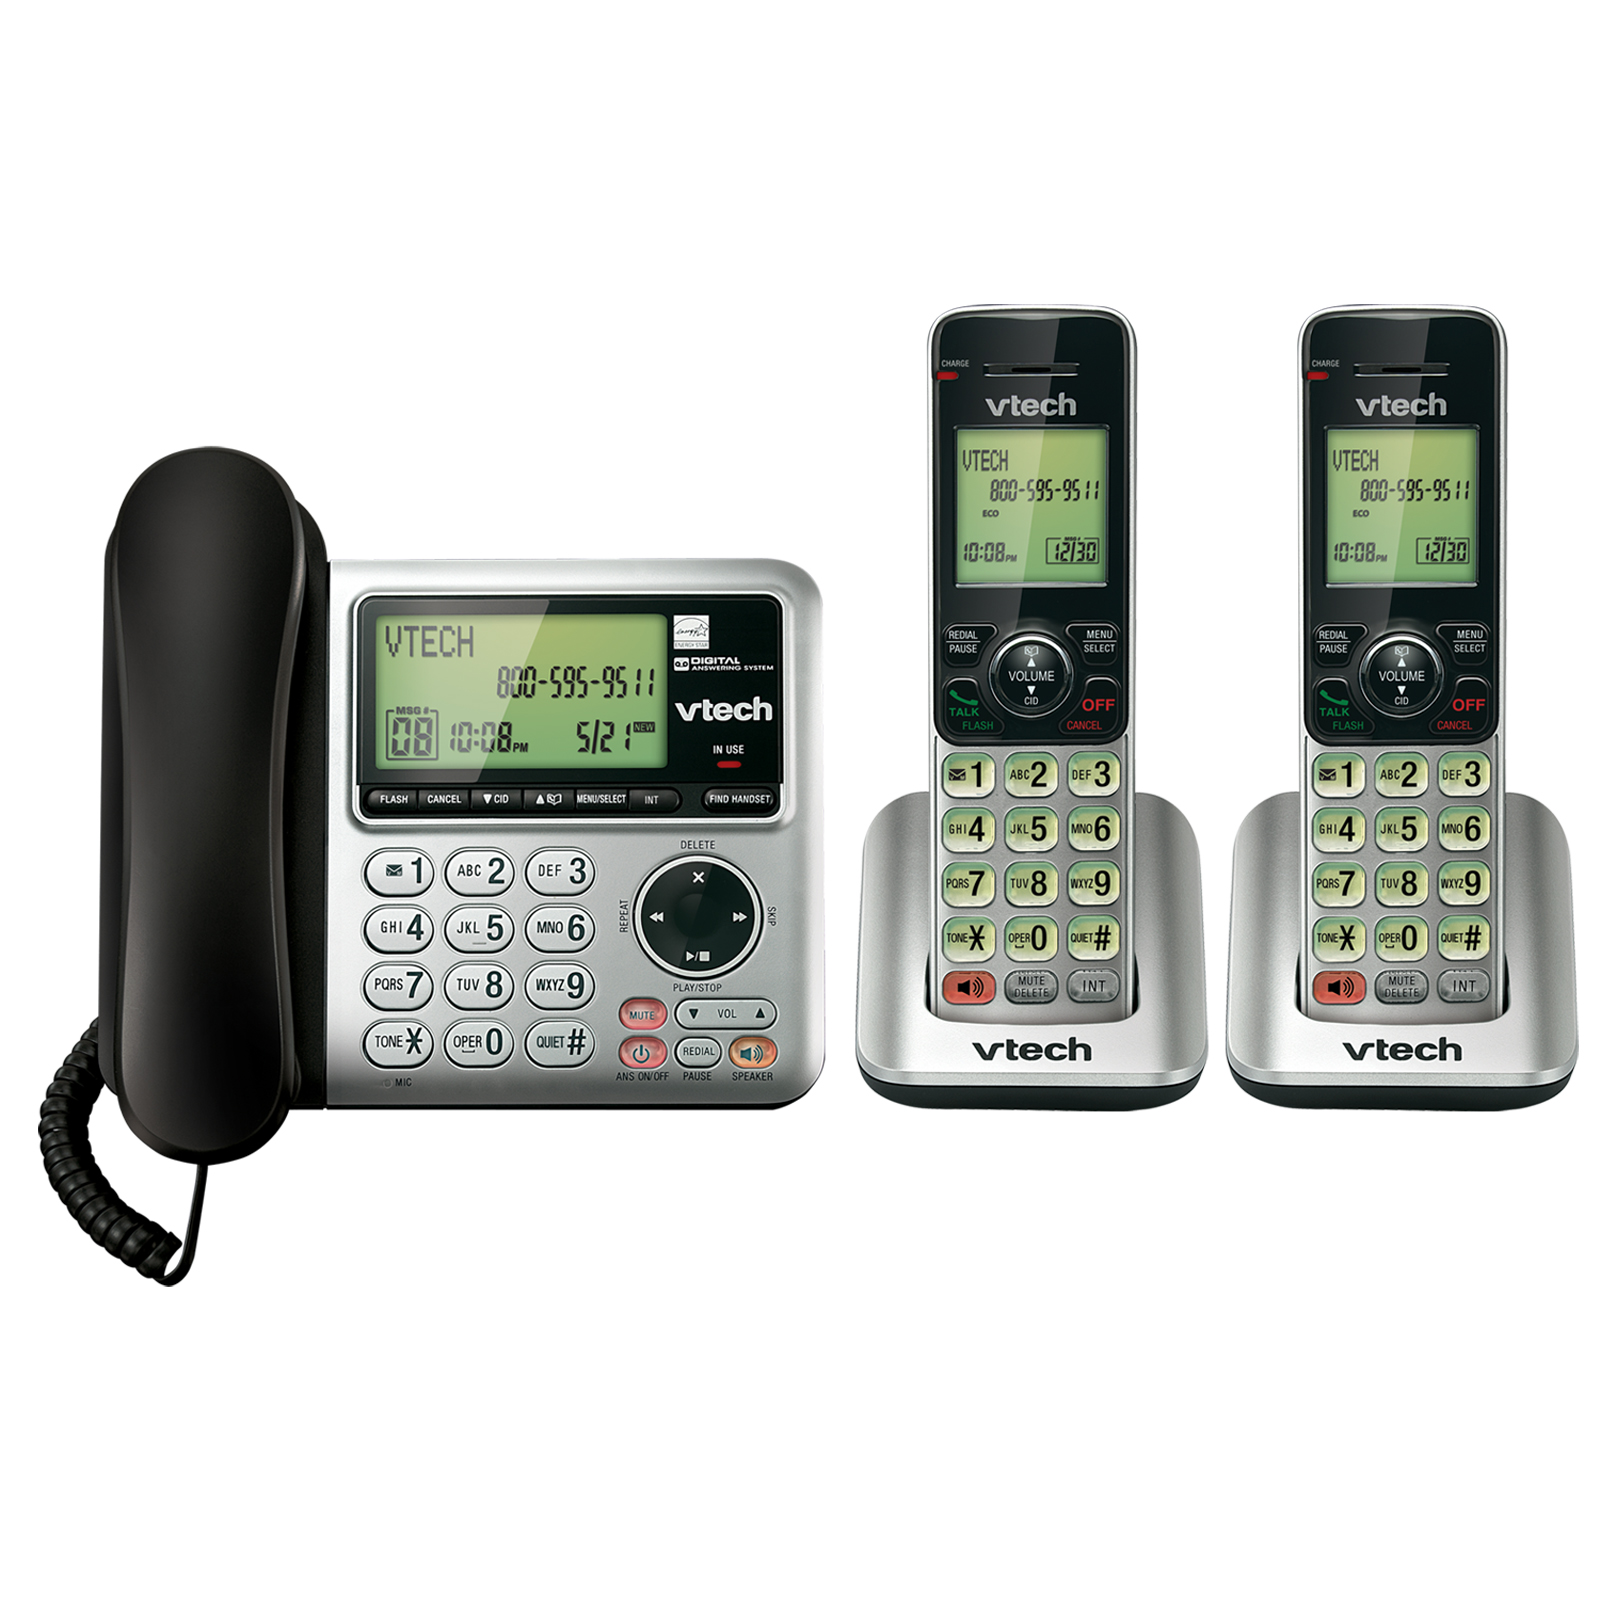 VTech CS6649-2 2 Handset Answering System with Caller ID/Call Waiting - Silver